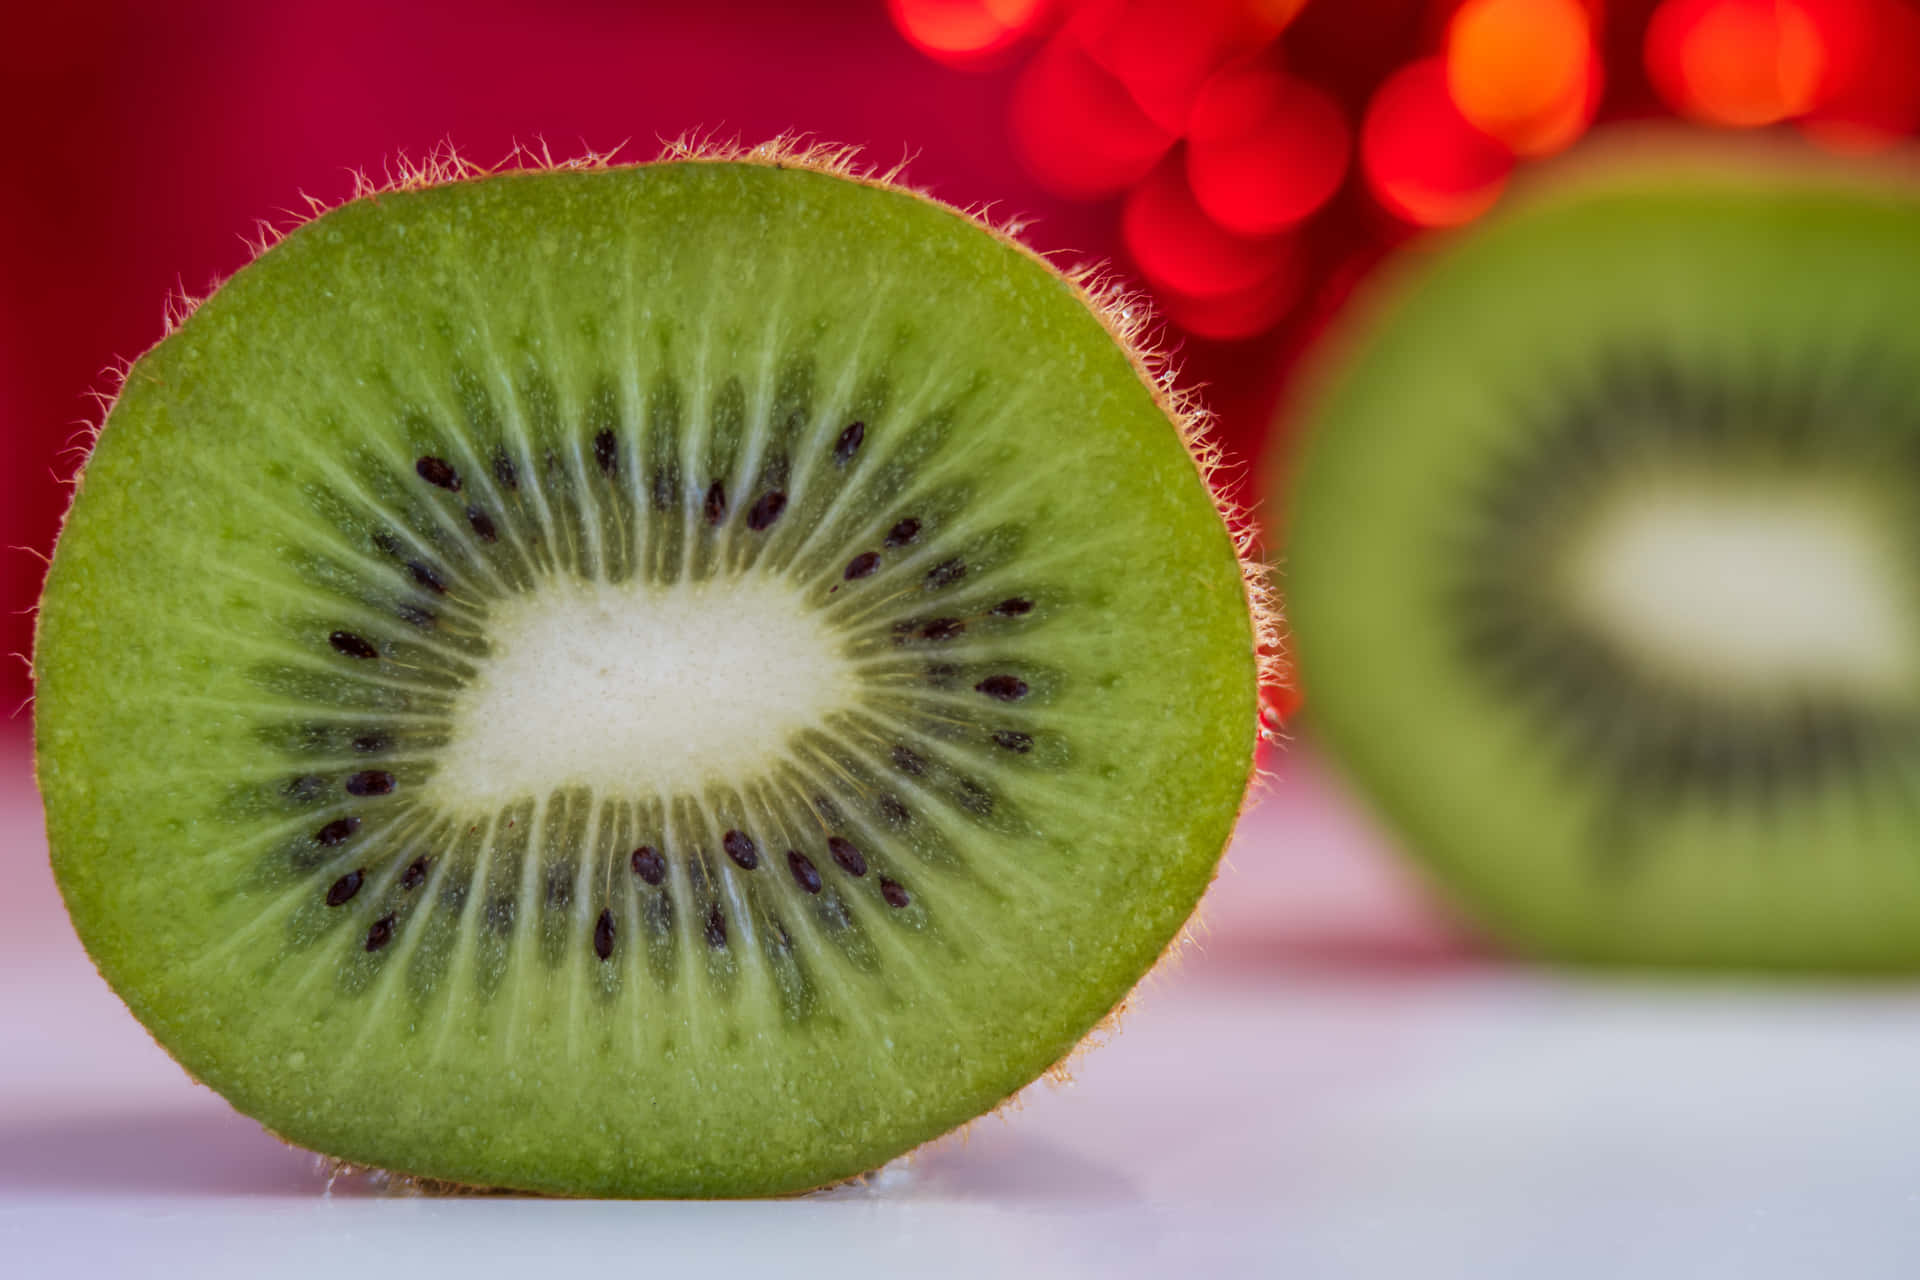 A close-up view of a sliced kiwi fruit on a wooden table